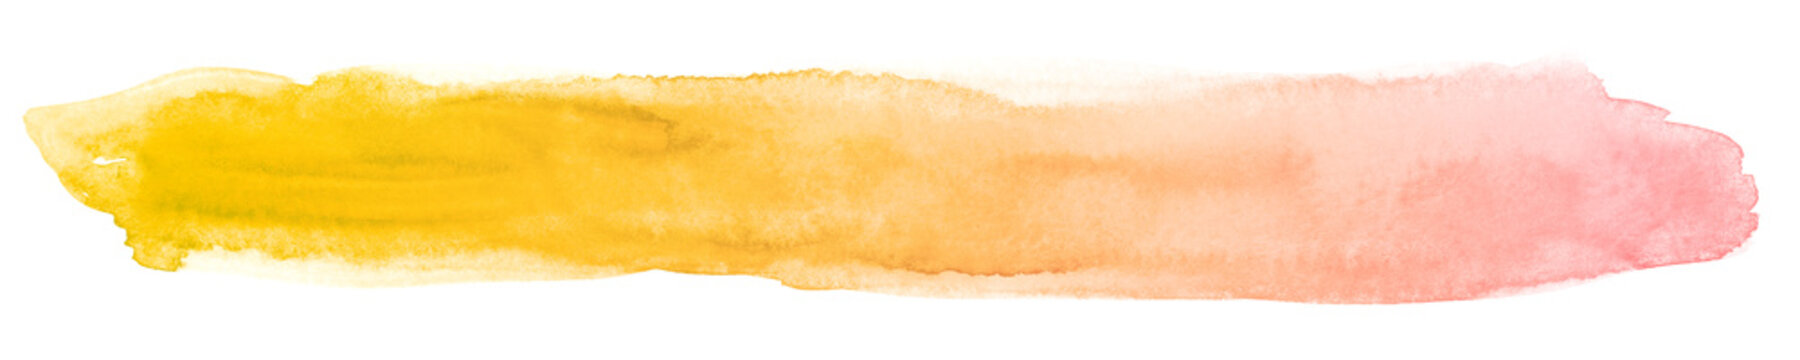 orange watercolor stain high resolution real texture